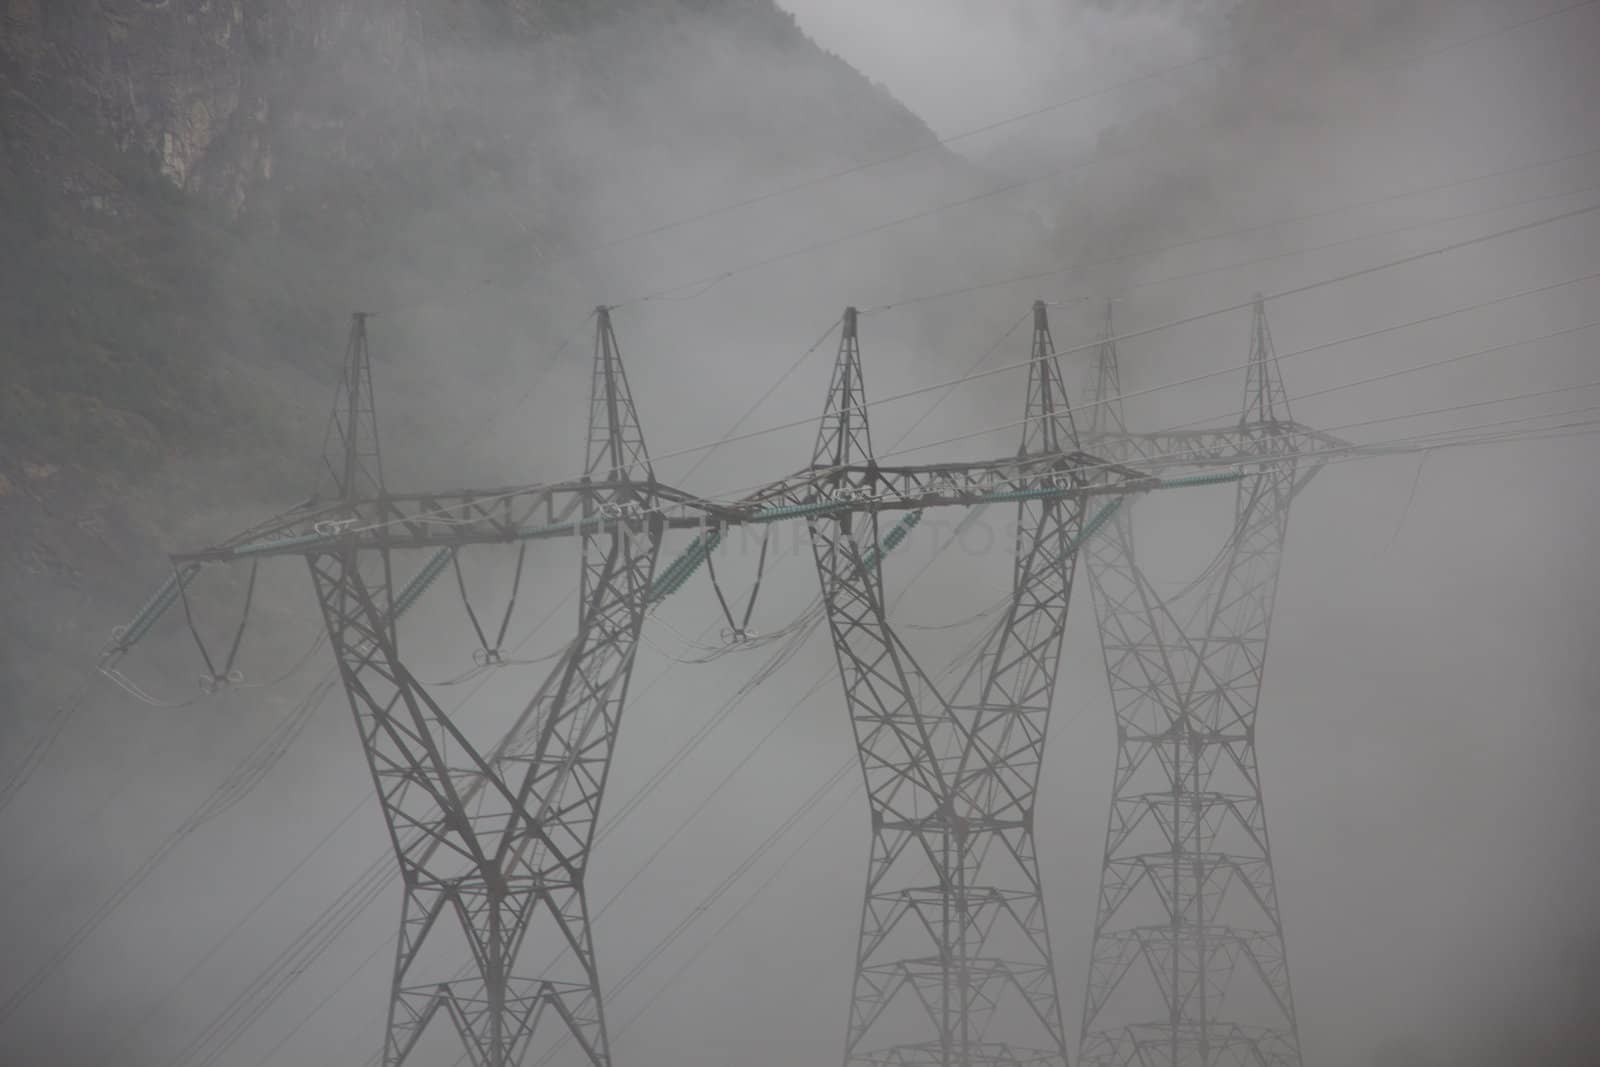 Picture of some powerlines in fog